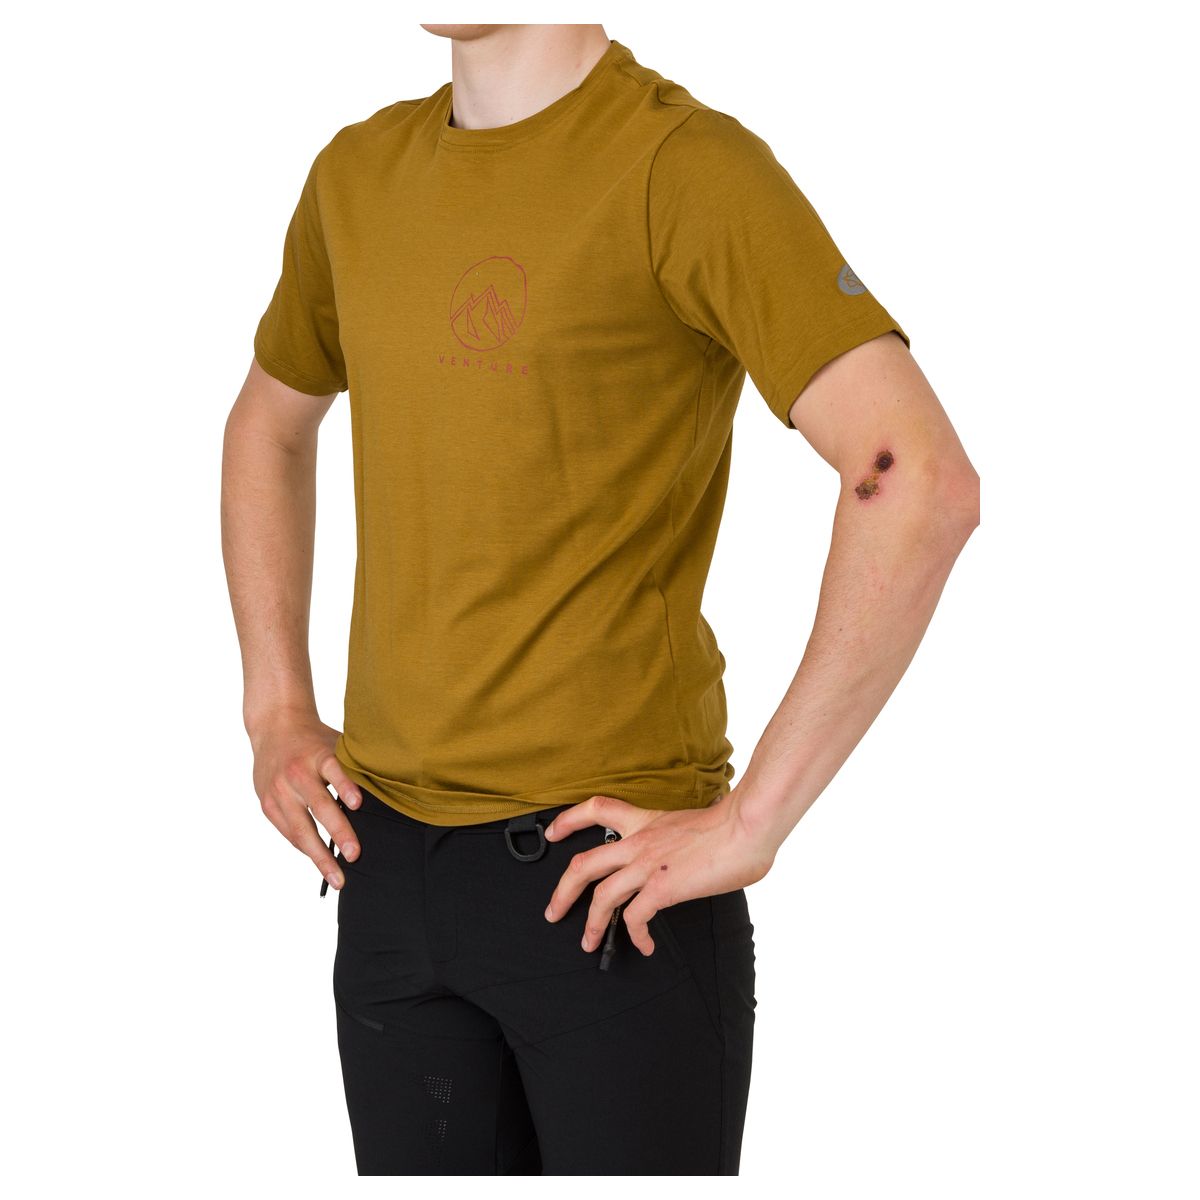 Performance T-shirt Venture fit example